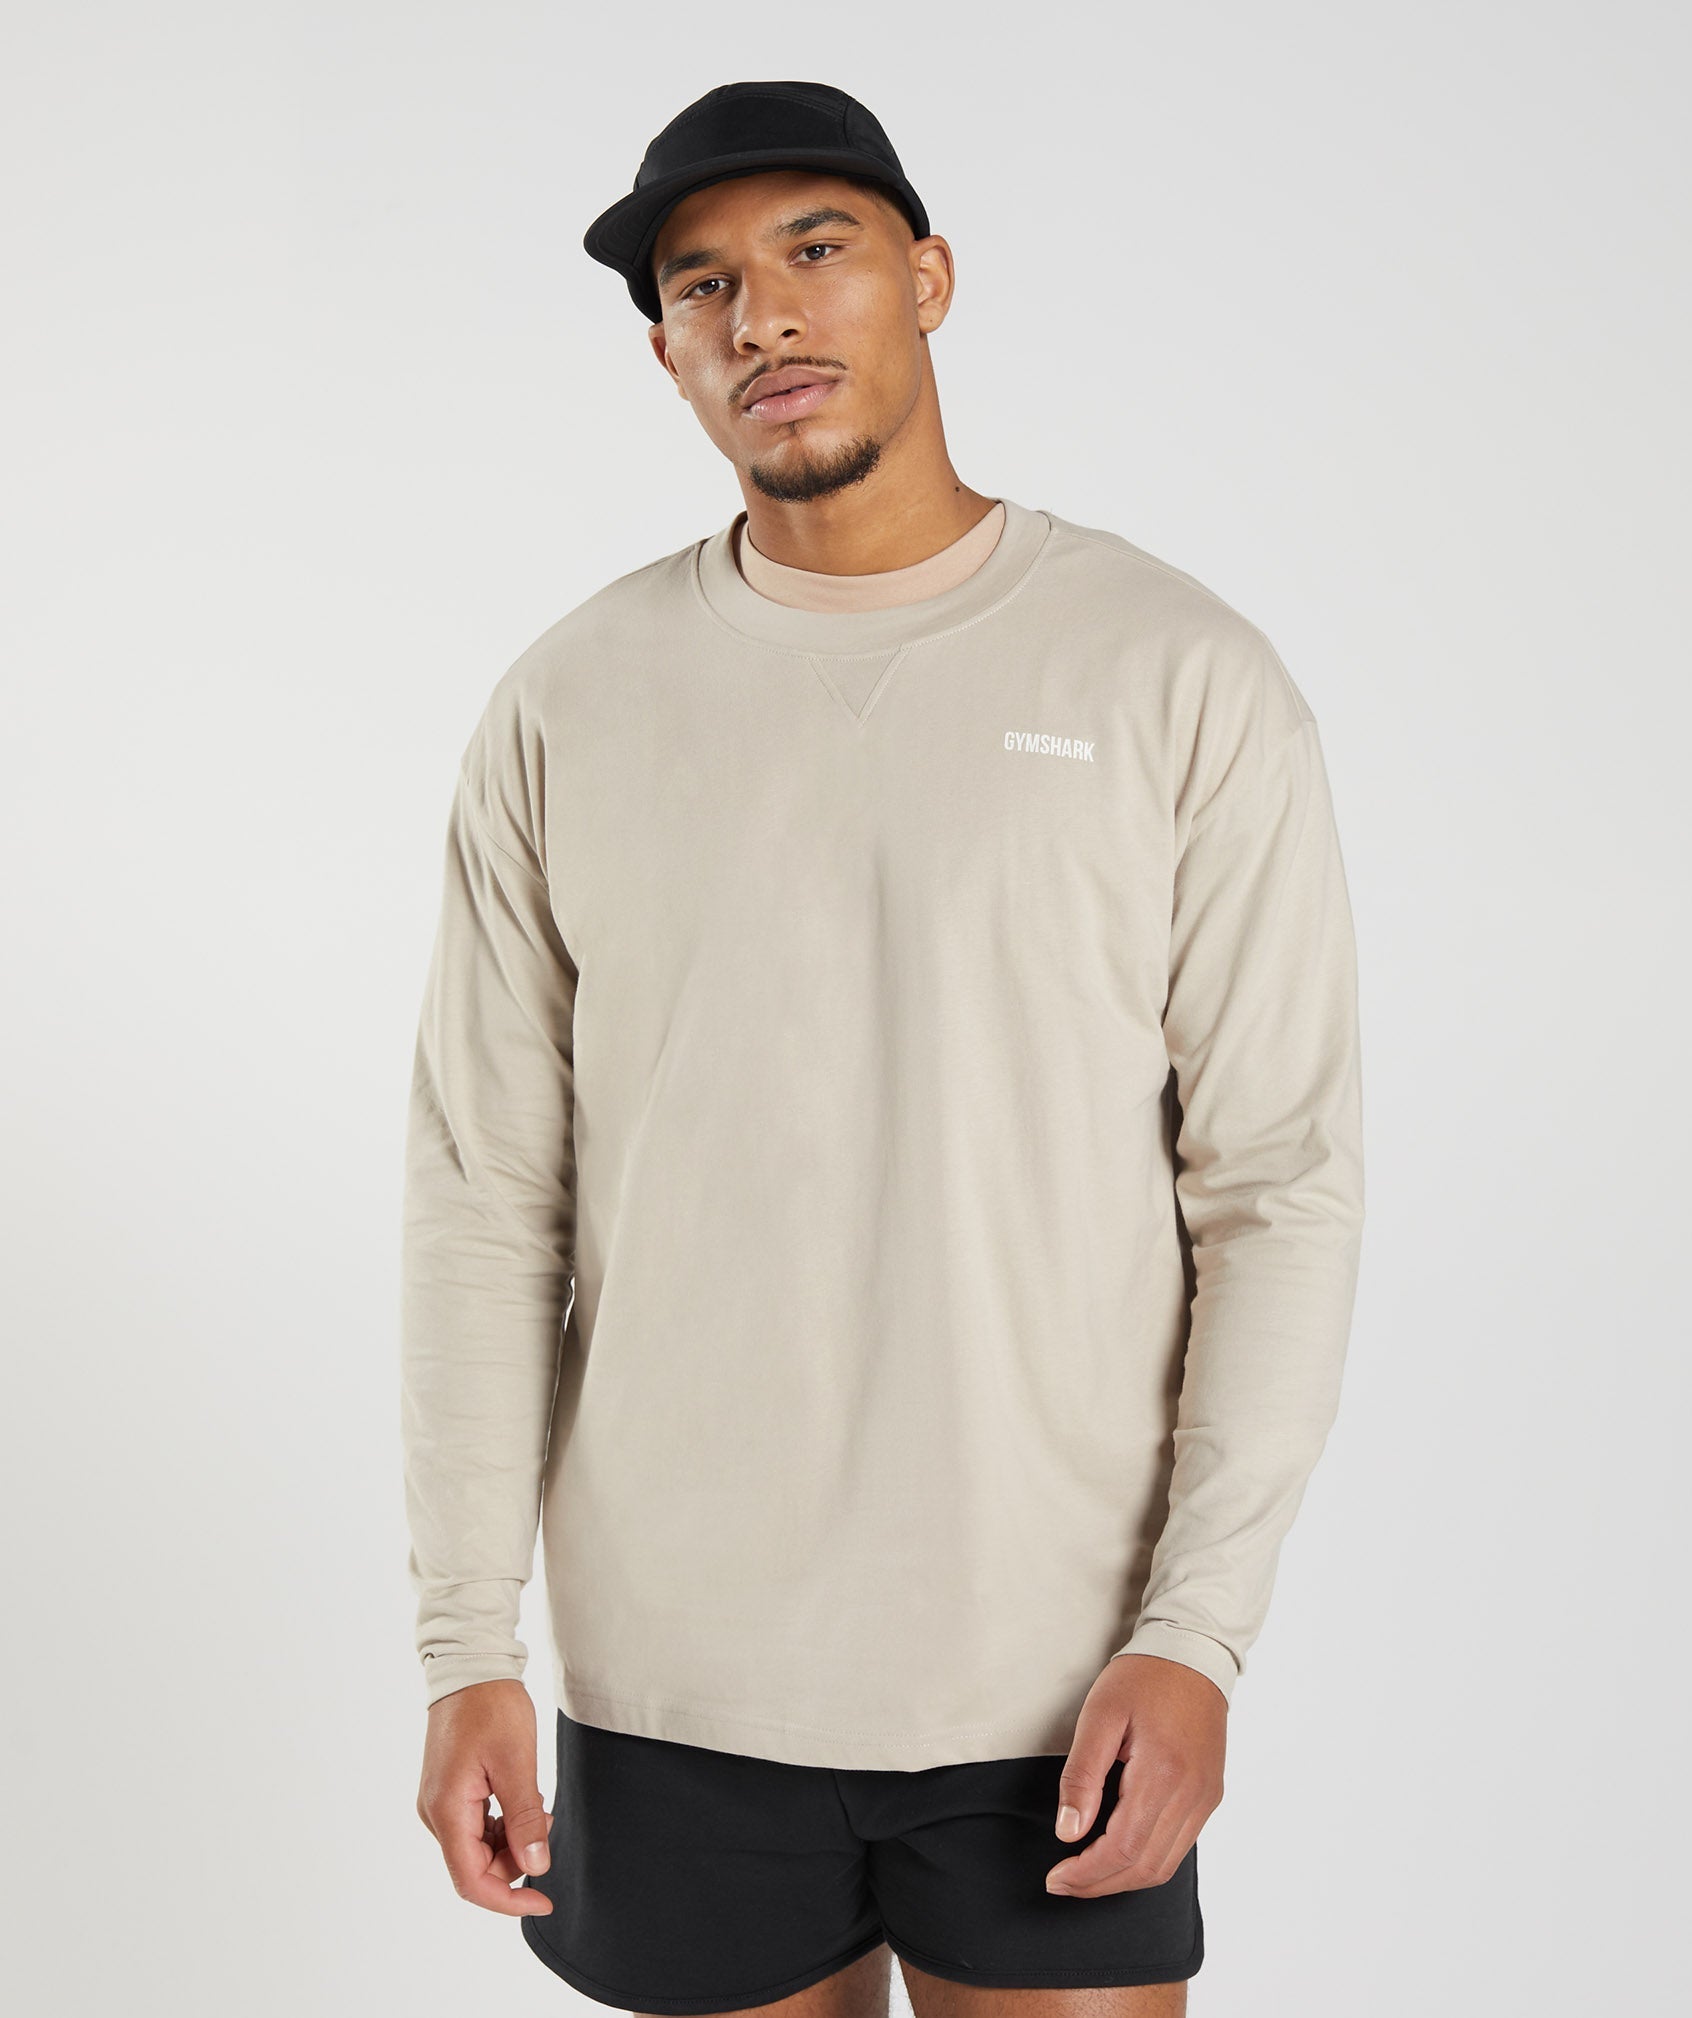 Rest Day Sweats Long Sleeve T-Shirt in Pebble Grey - view 2